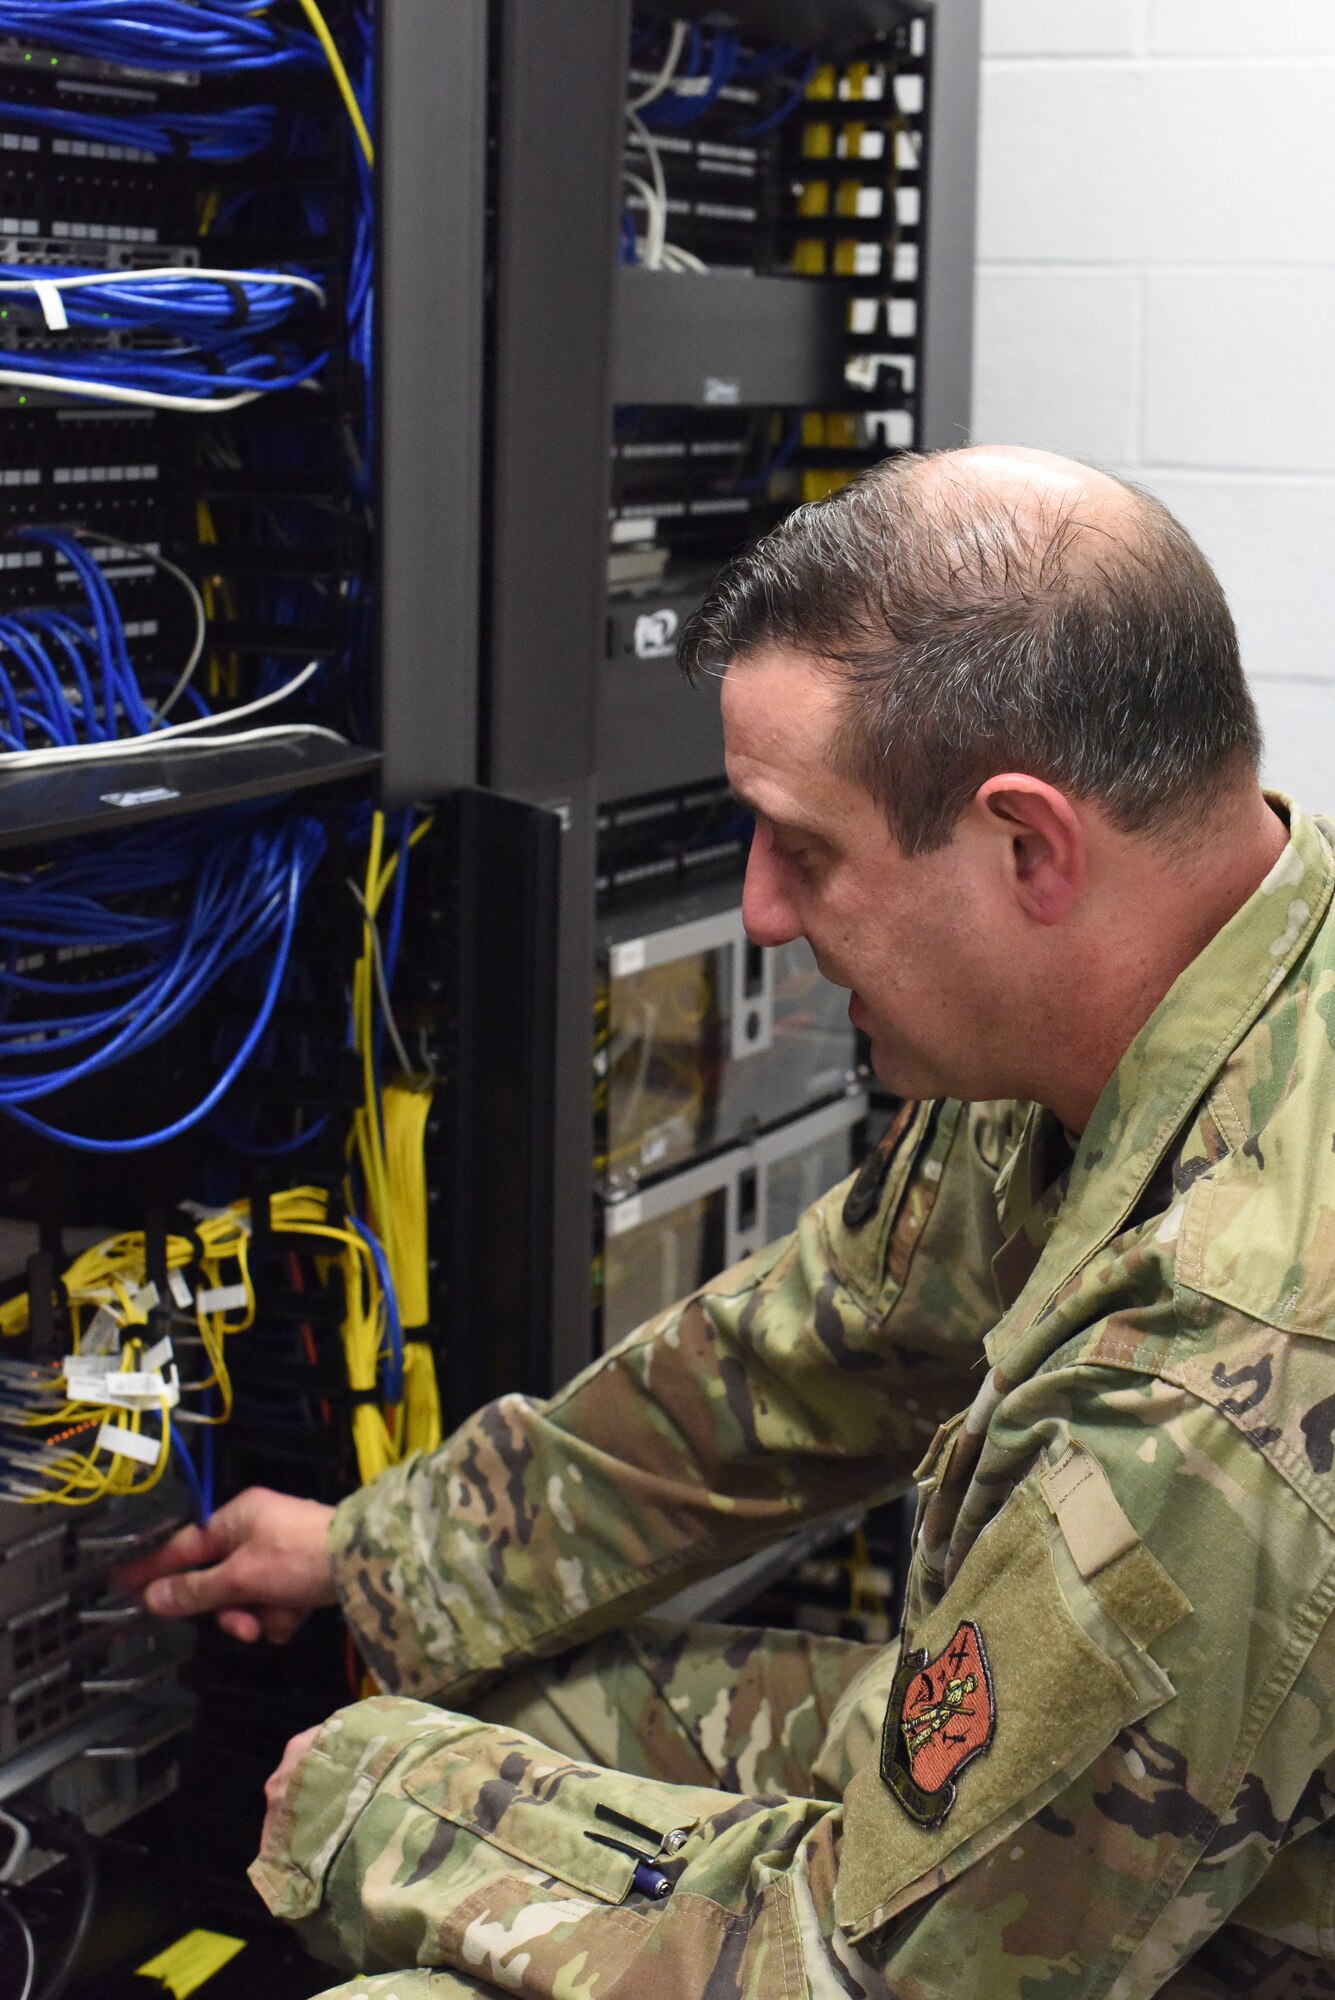 U.S. Air Force Master Sgt. Richard P. Beetstra adjusting cables in communication closet at Francis S. Gabreski Air National Guard Base, Westhampton Beach, N.Y., February 6, 2022. 106th Rescue Wing Communications Flight completed a $1 million Information Technology infrastructure upgrade at the 106th Rescue Wing, Westhampton Beach, N.Y. in February 2022.  (U.S. Air National Guard Photo by Lt. Cheran Campbell)